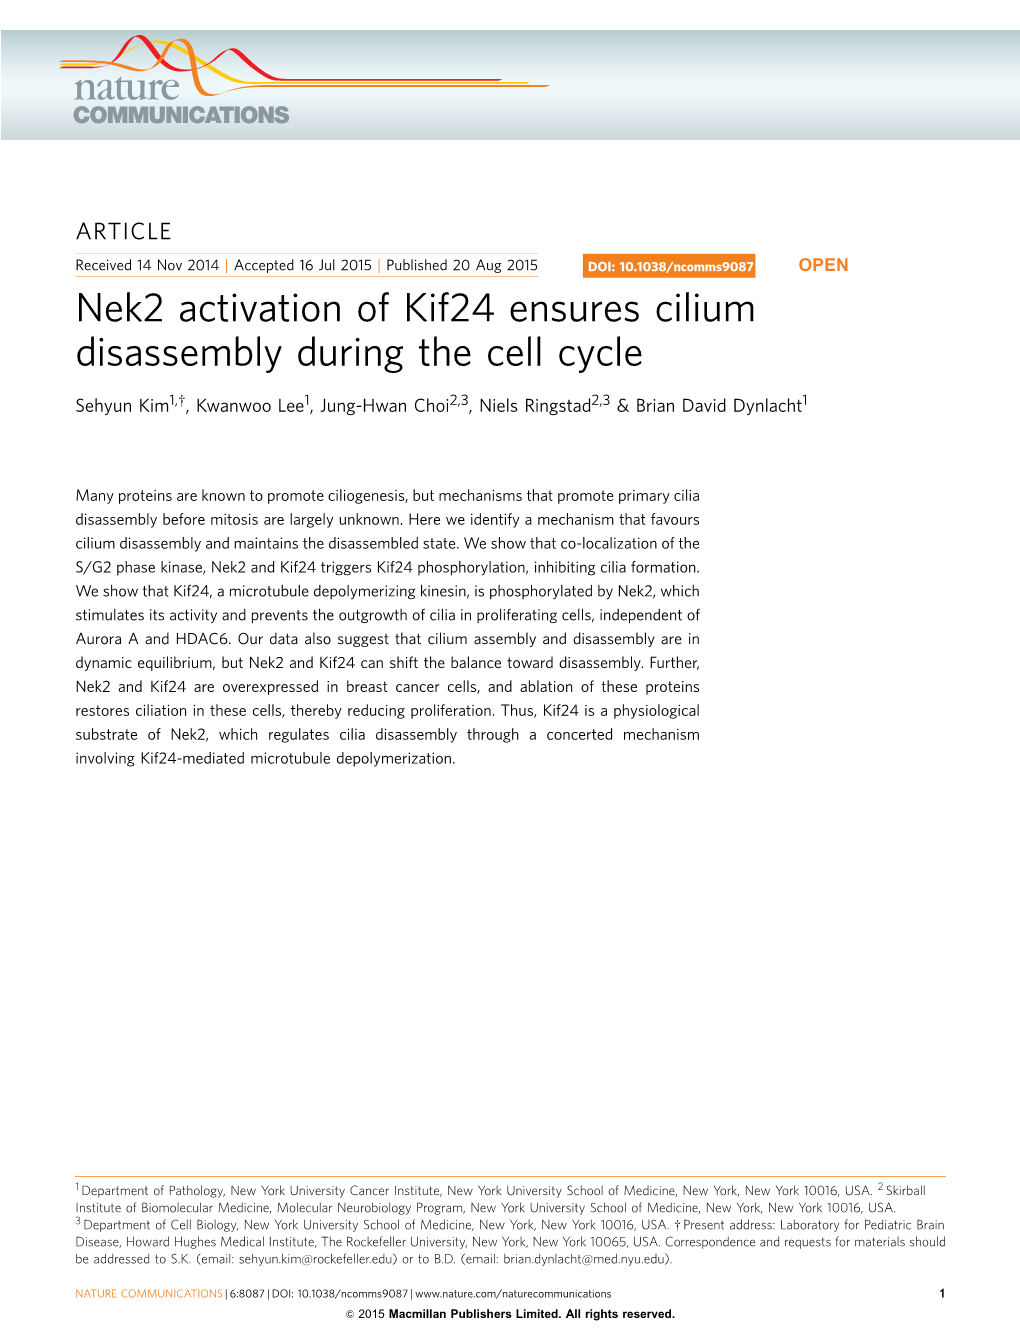 Nek2 Activation of Kif24 Ensures Cilium Disassembly During the Cell Cycle